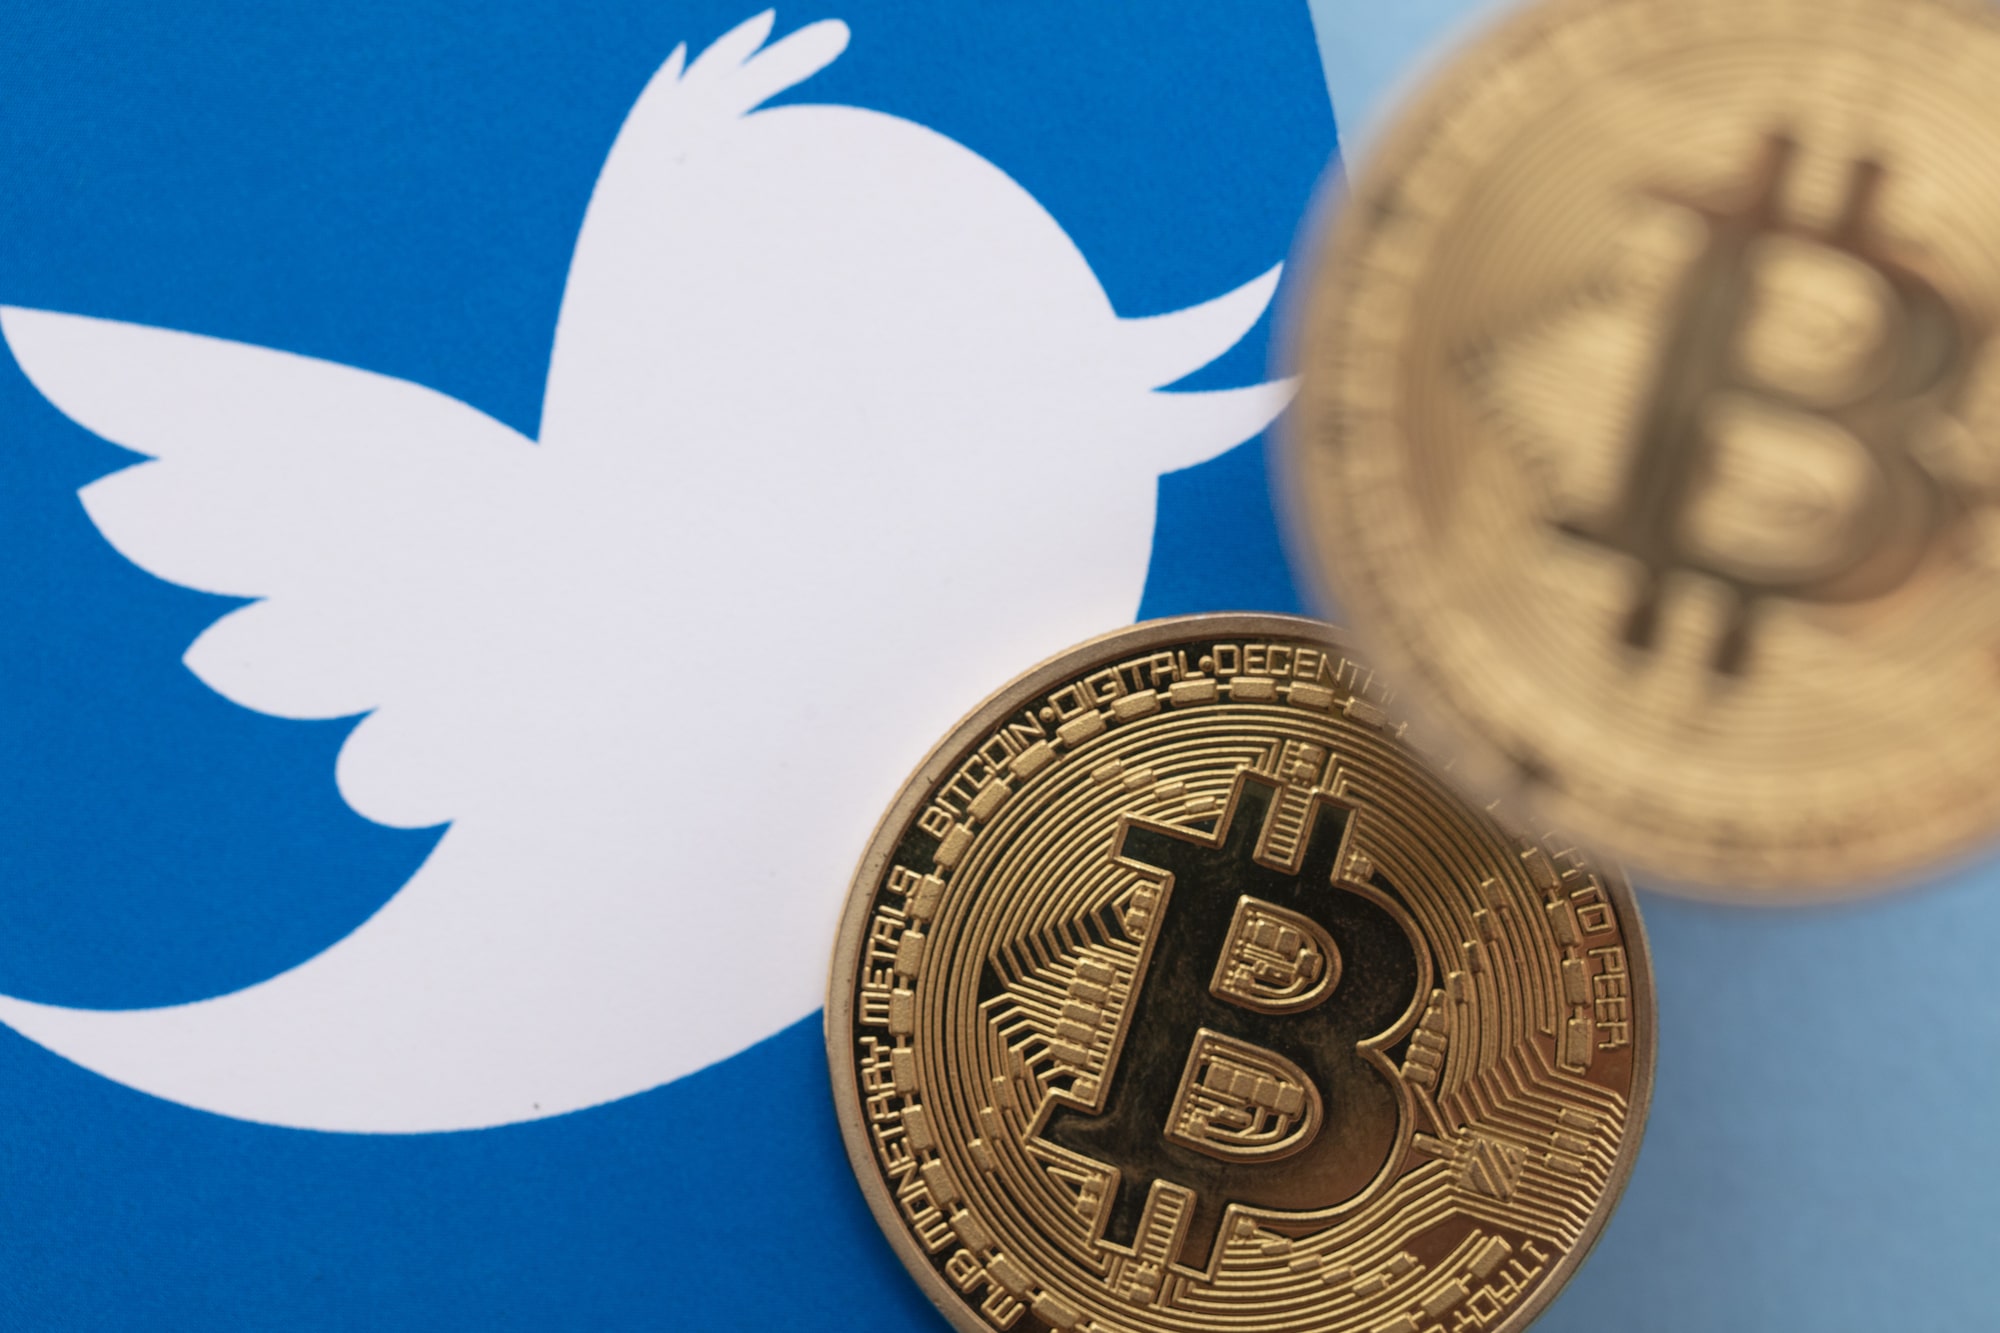 Jack Dorsey sees integrating Bitcoin into Twitter services